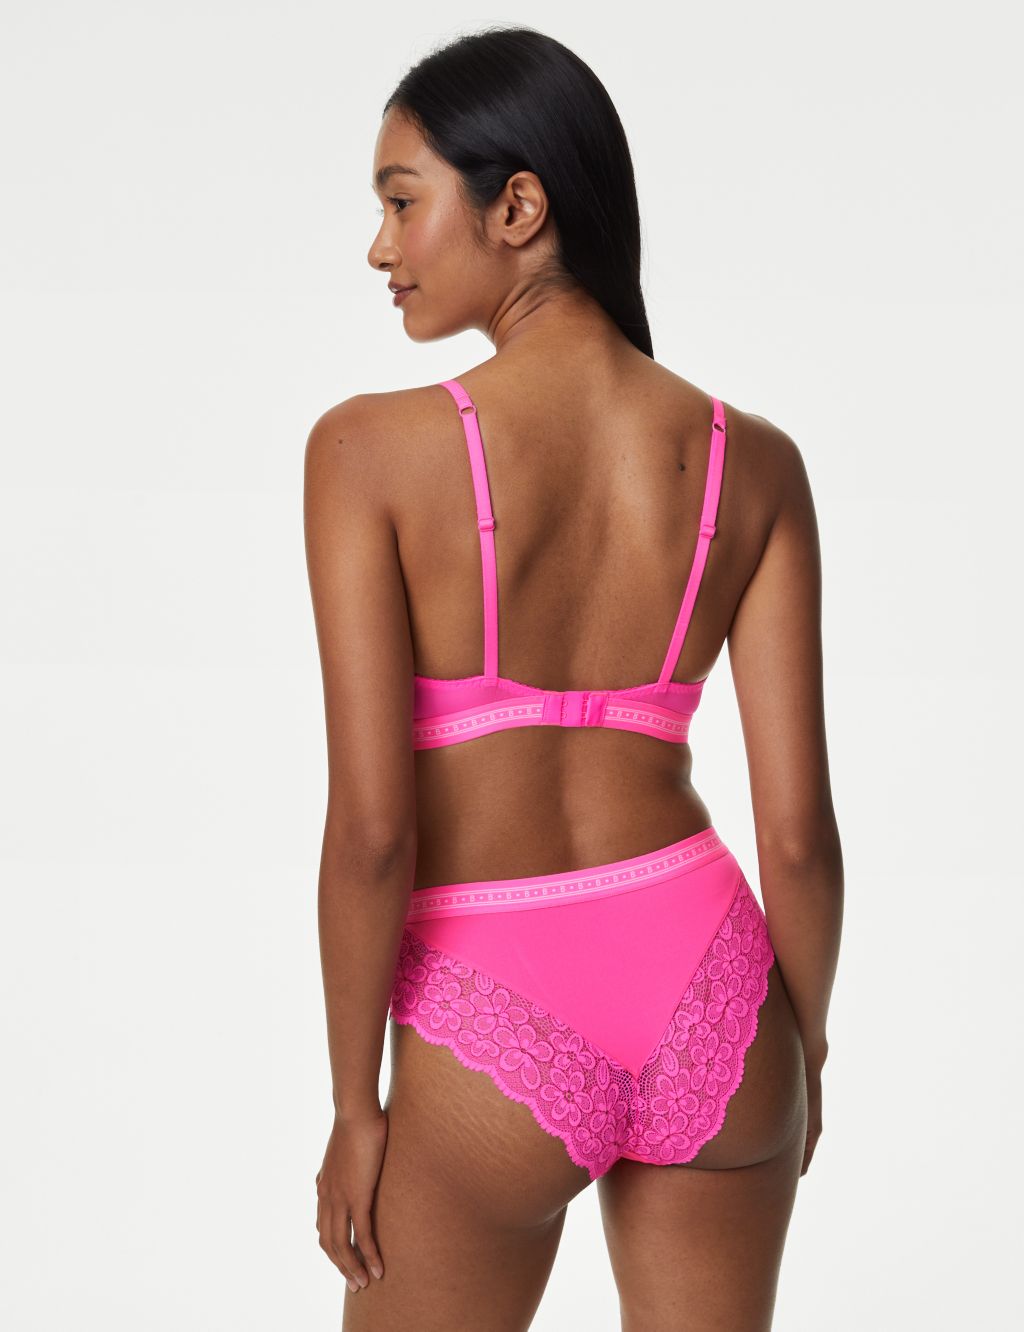 Buy Victoria's Secret No Show Cheeky Knickers from the Laura